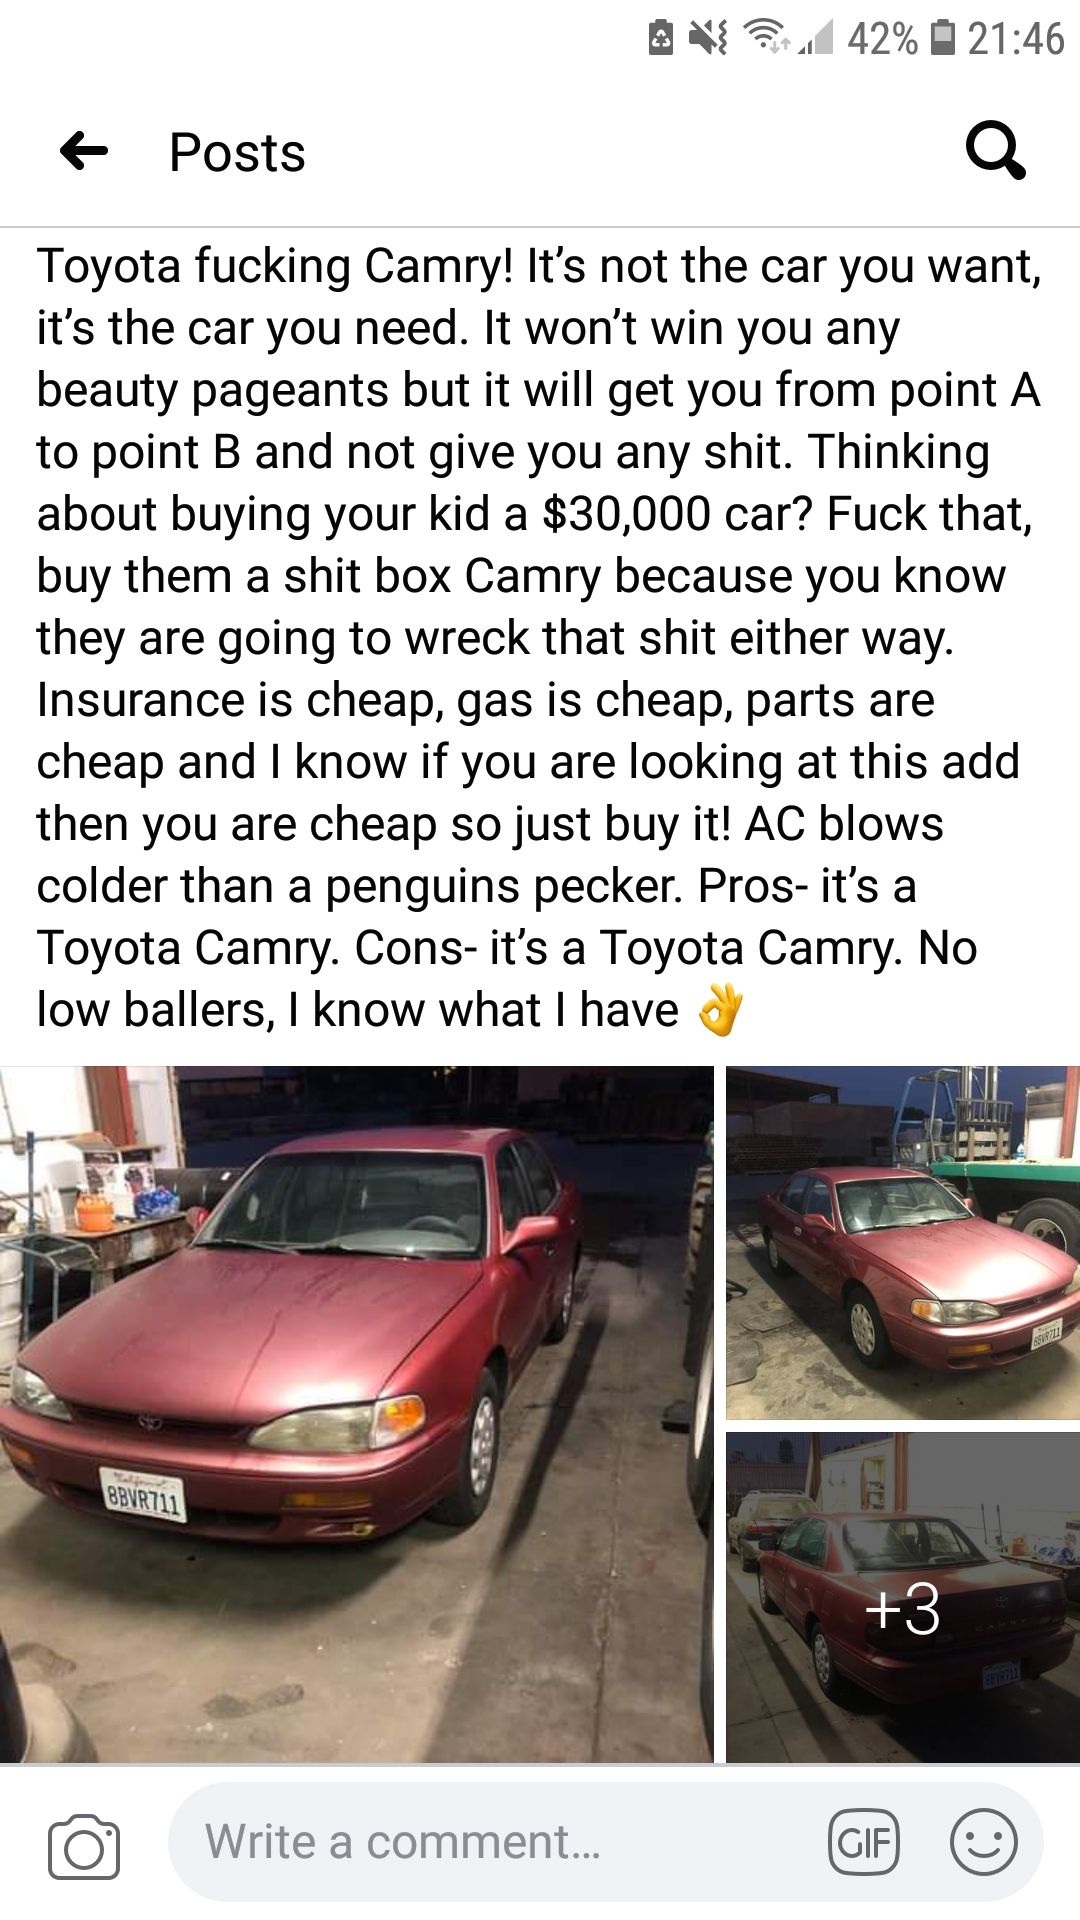 Posted on Fresno buy/trade on FB. Guy knows how to market